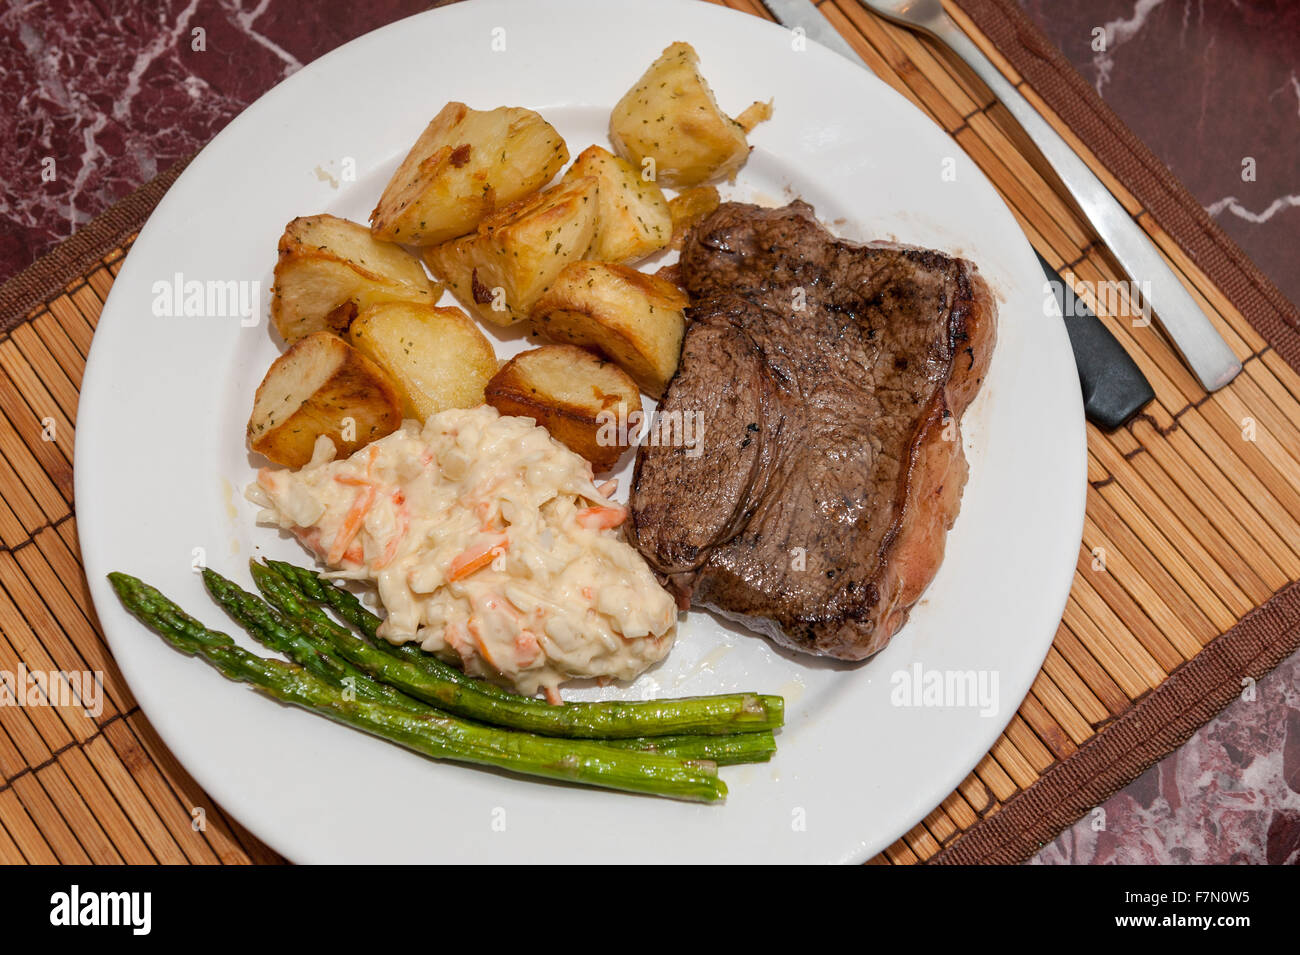 Steak meal with vegetables on a plate from above Stock Photo